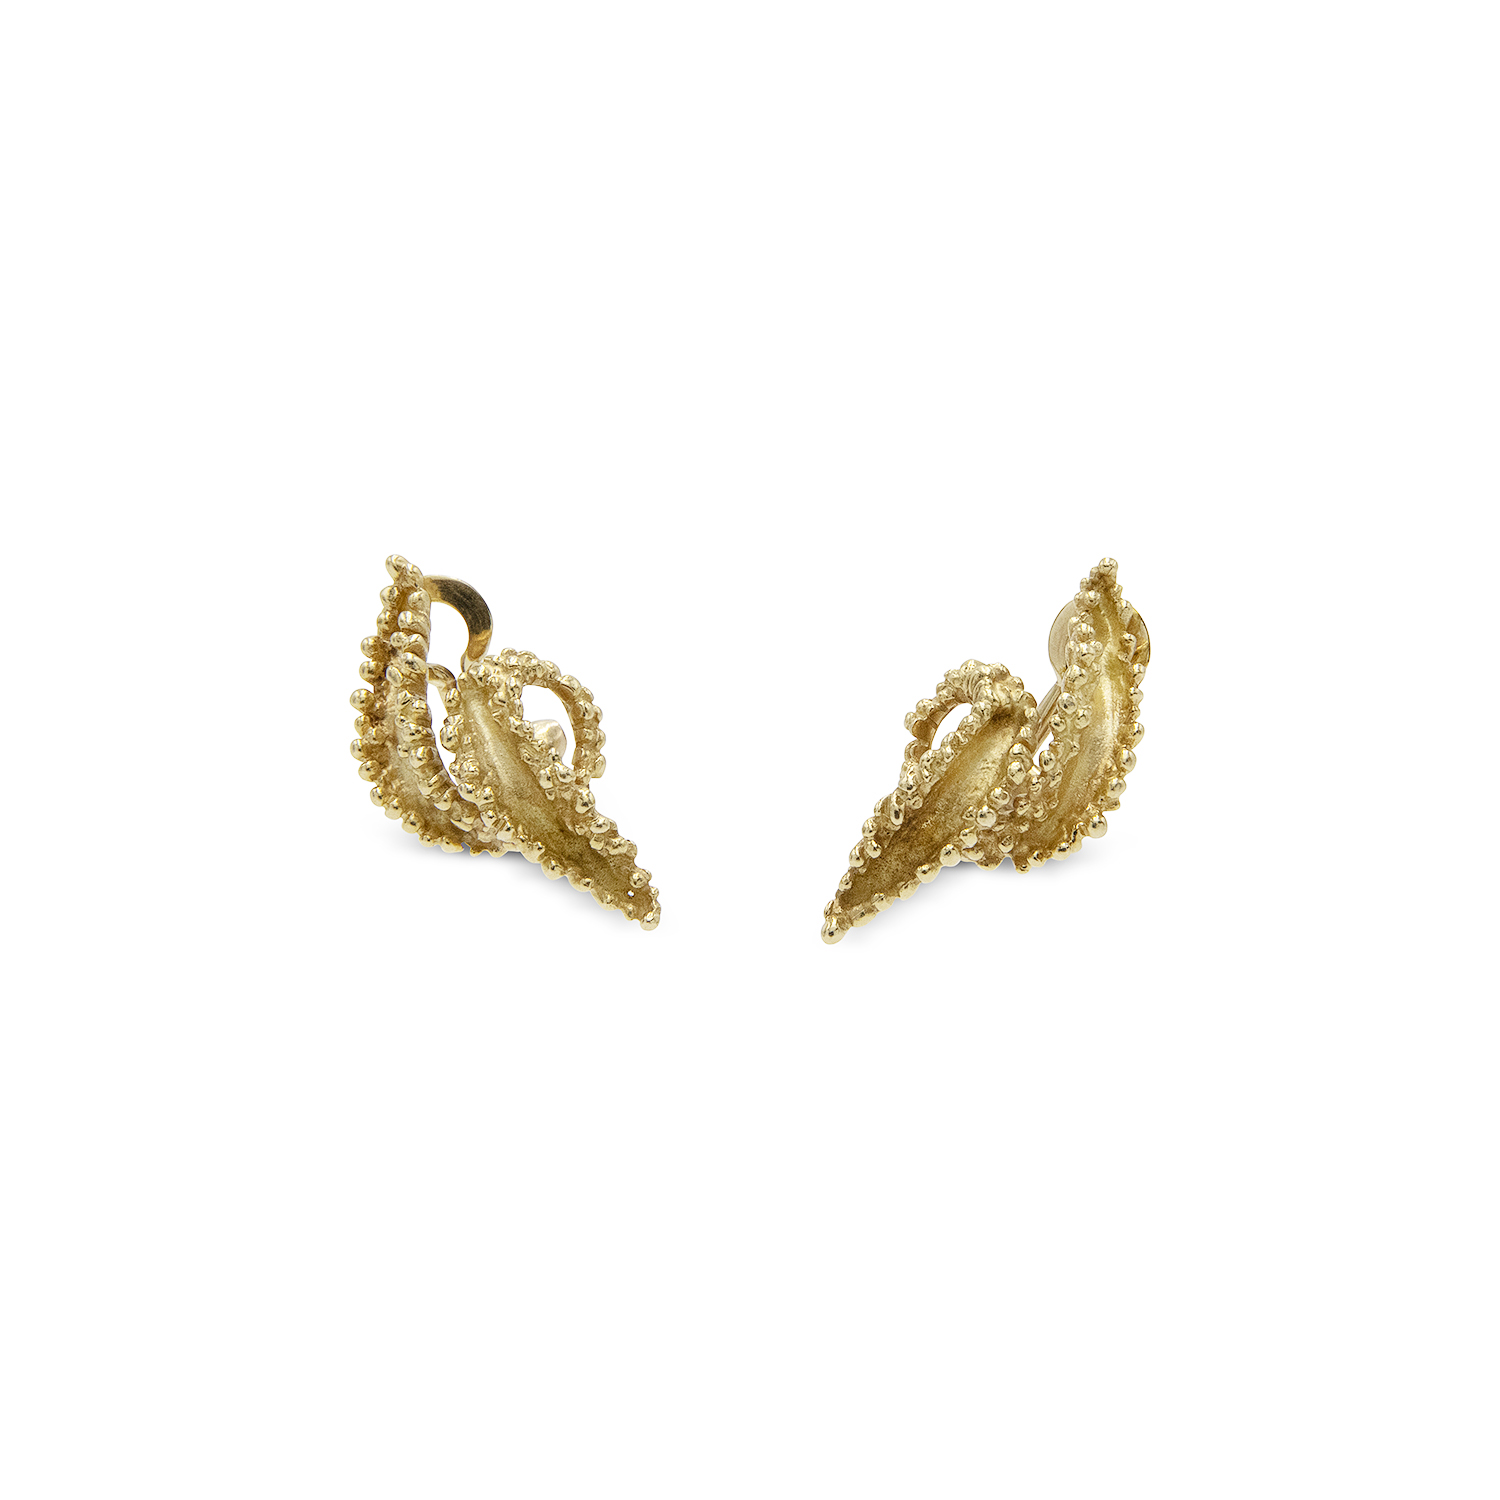 18K Yellow Gold Textured Flame Earrings, Serial FL42787